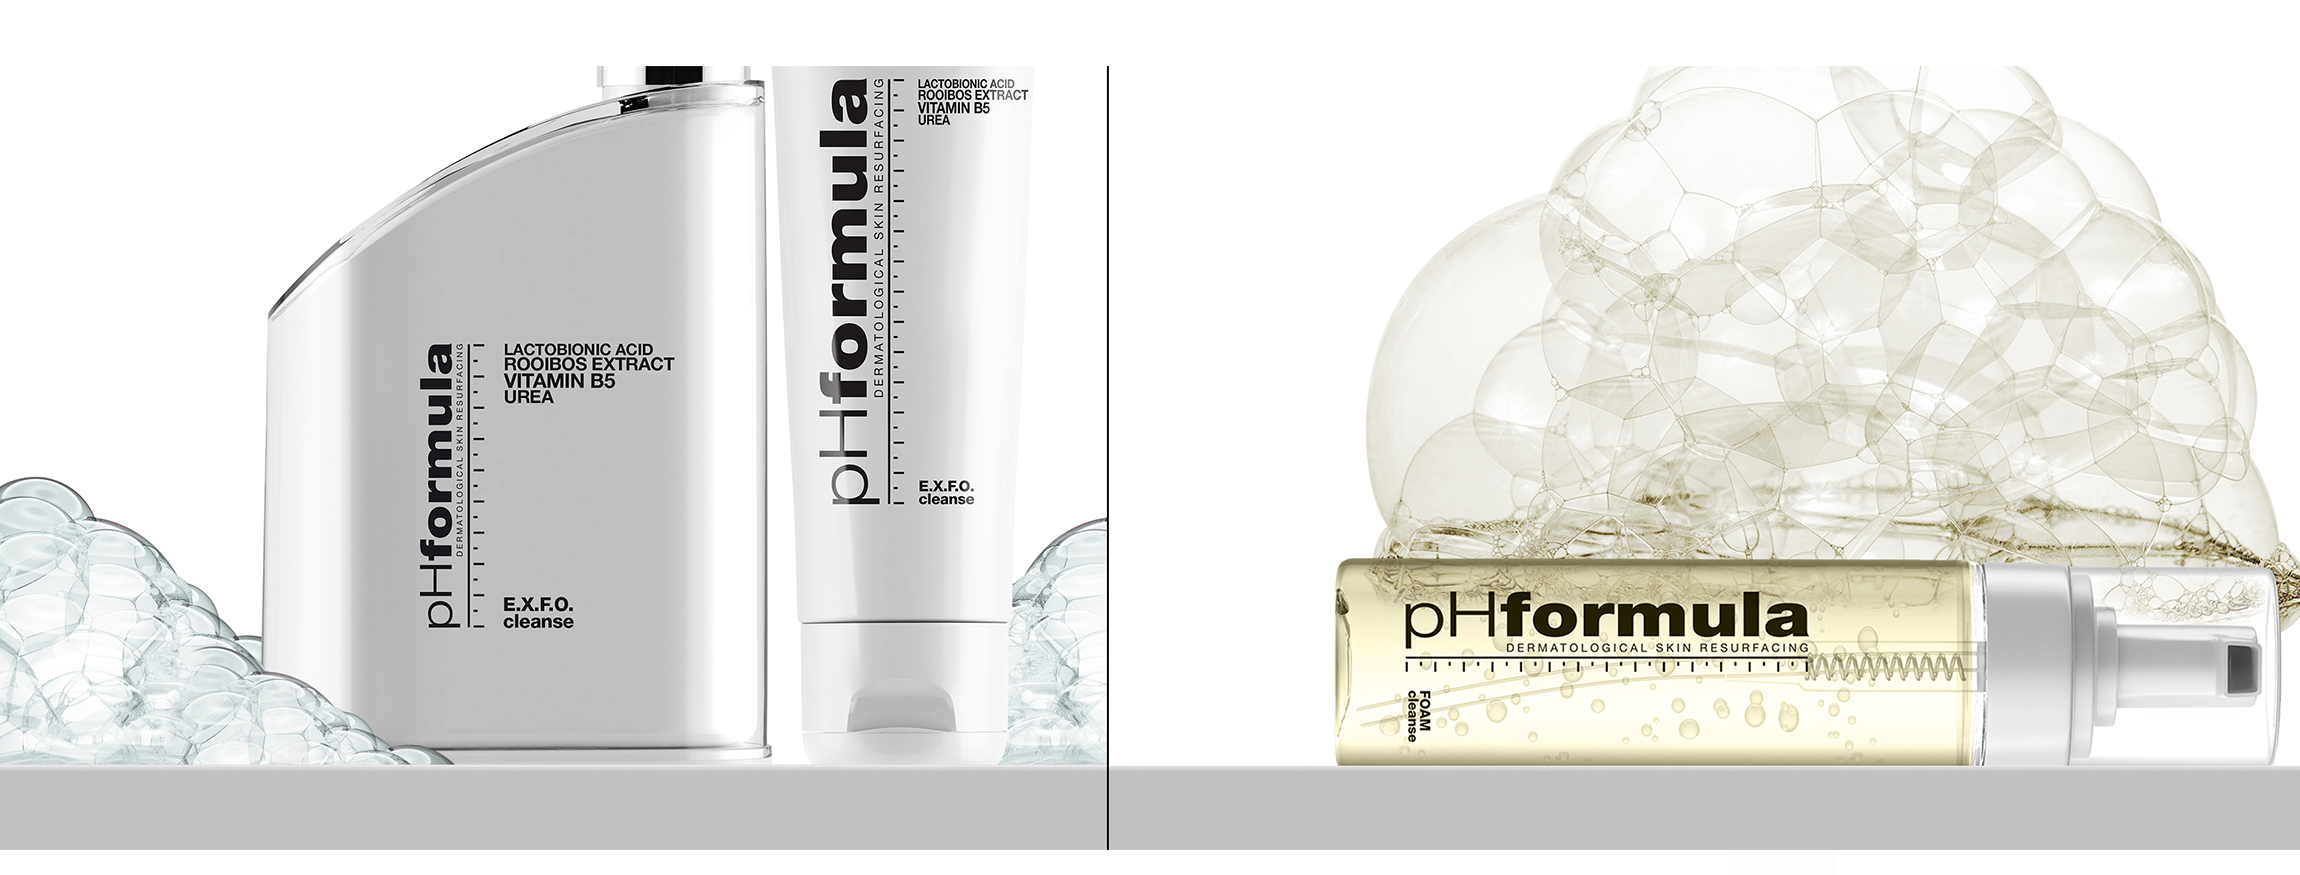 pHformula has the perfect and simple skincare regime for men with very easy steps to follow! : Step 1